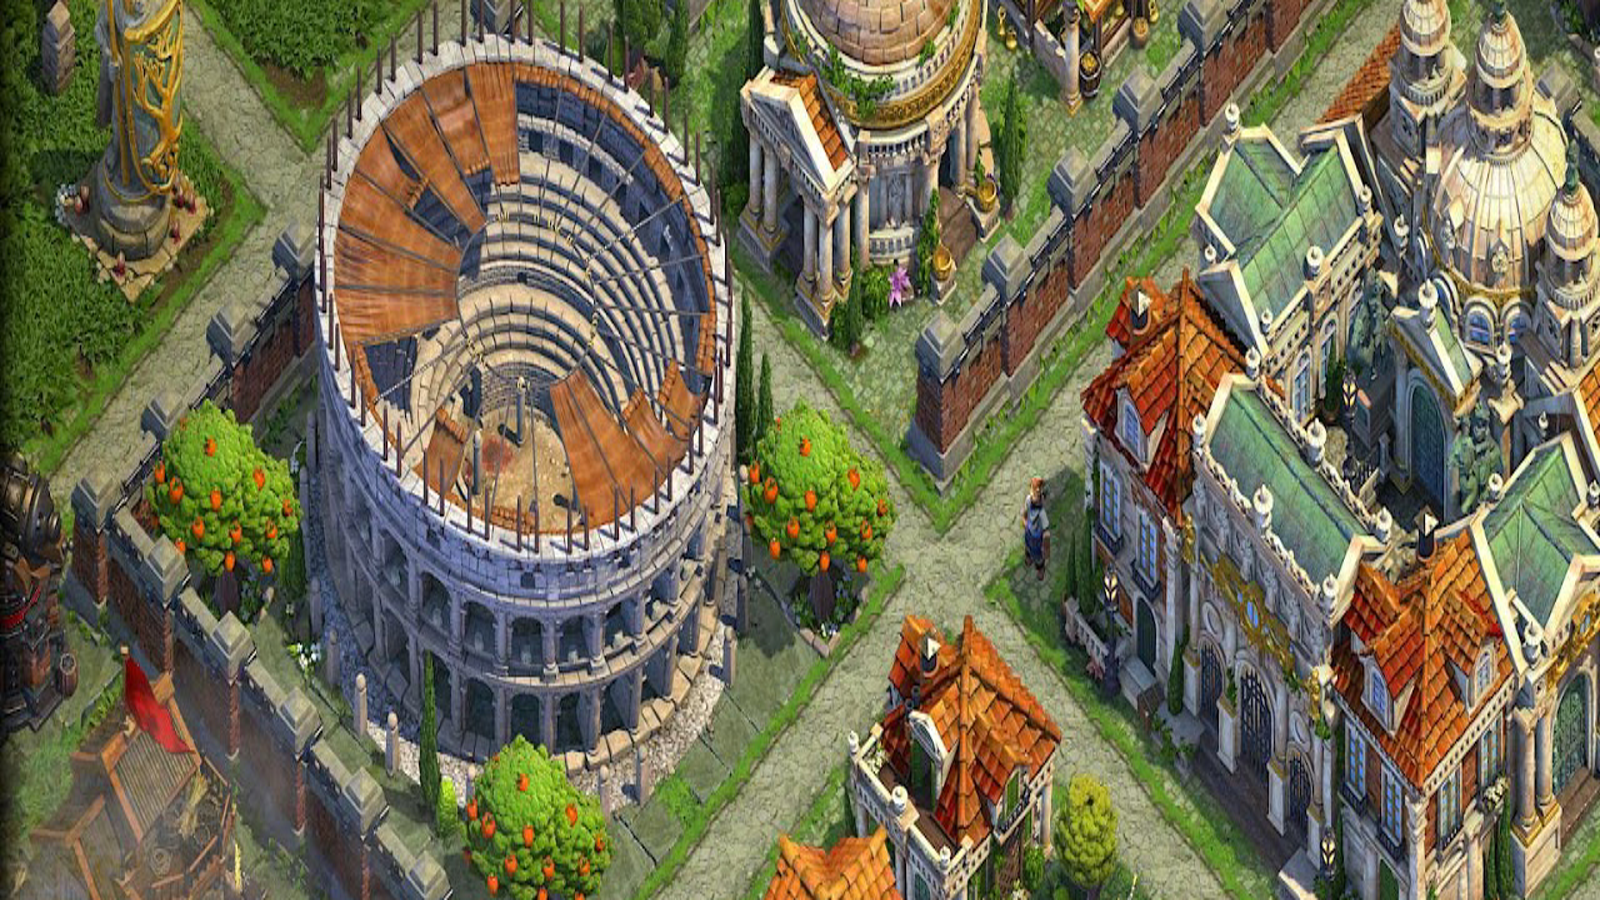 Rise of Nations developer announces DomiNation for iOS and Android